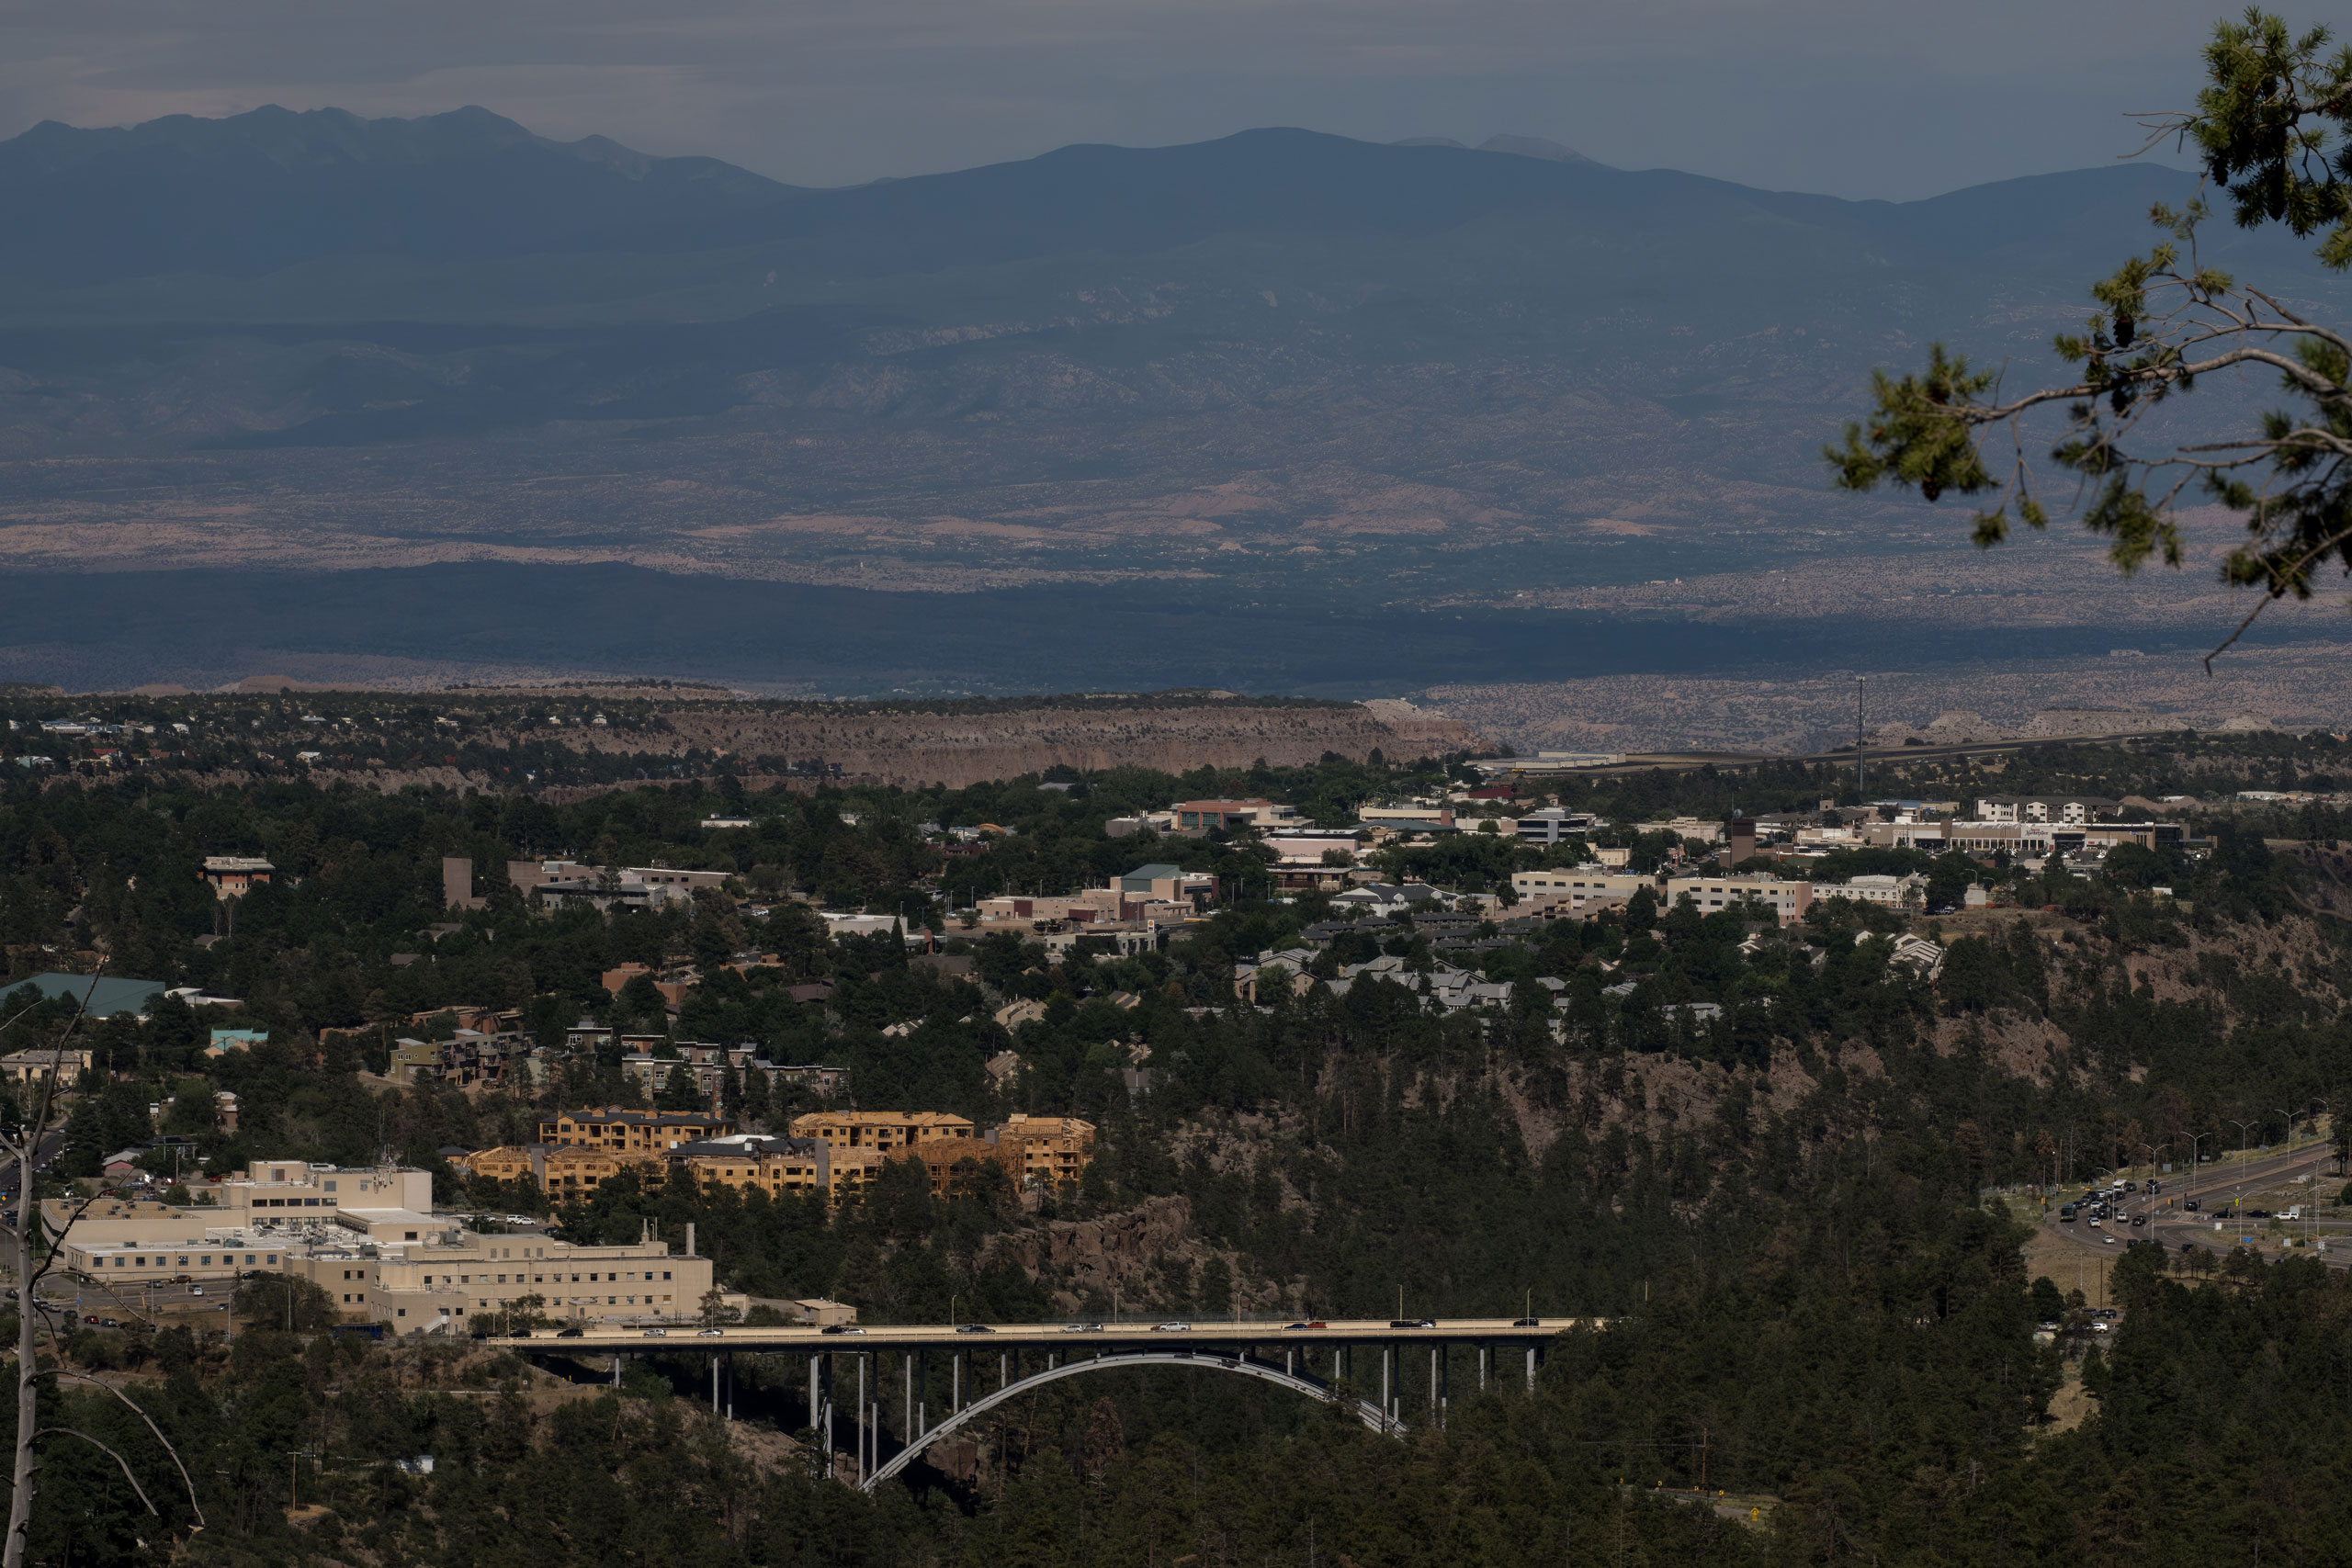 The view from a ridge overlooking Los Alamos. (Ramsay de Give for TIME)